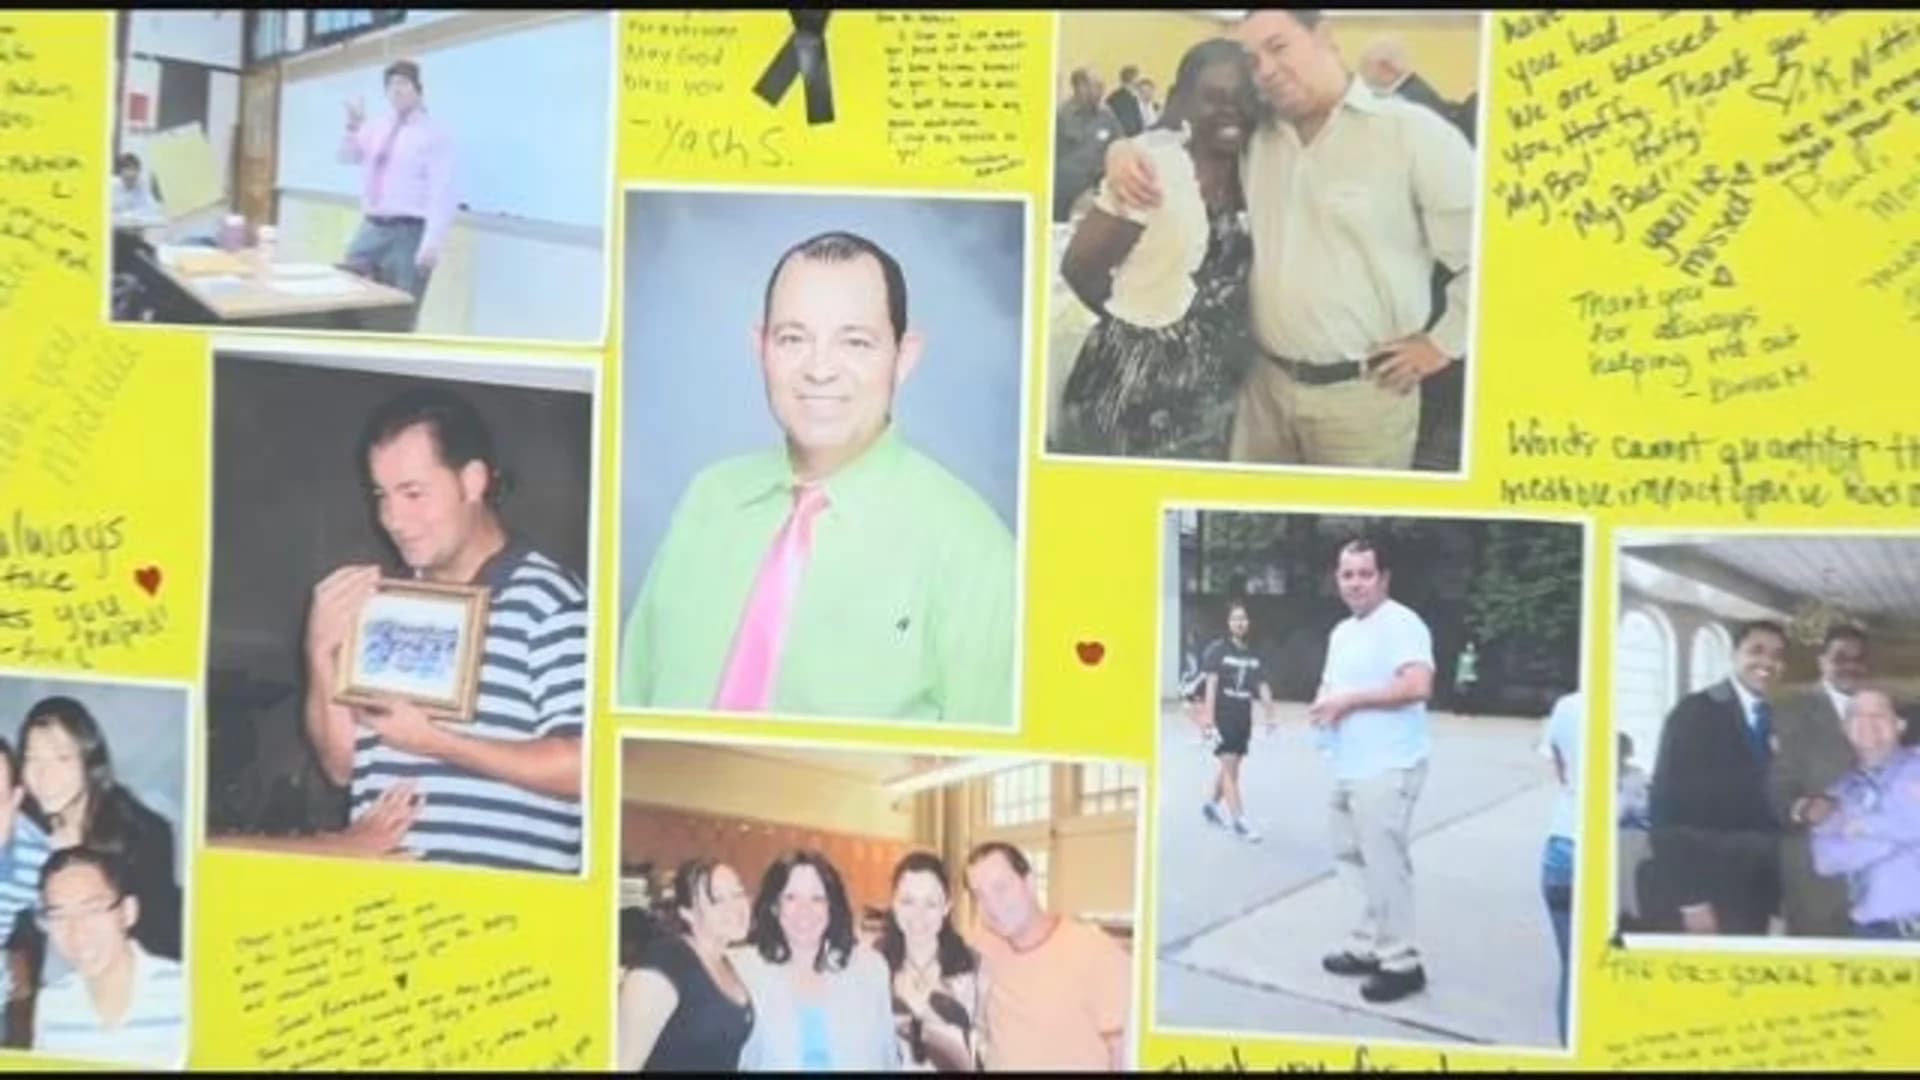 Students, staff at Brooklyn Tech gather to remember beloved assistant principal